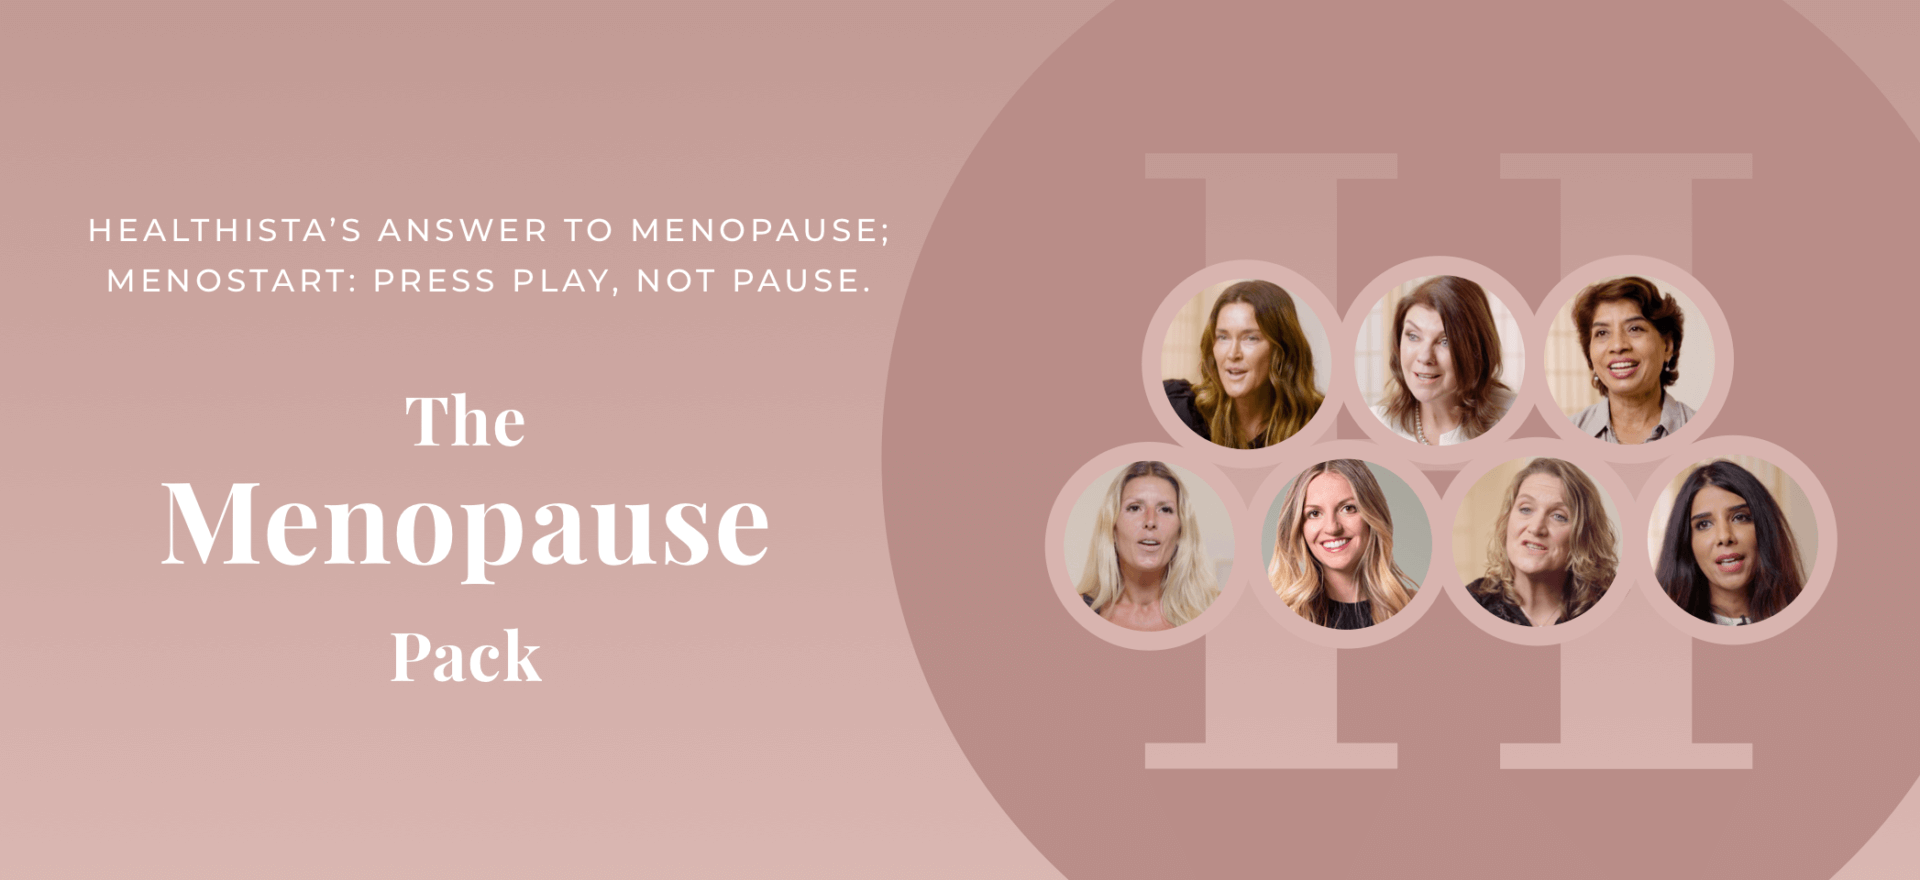 Healthista Launches The Menopause Pack to Support Women with Trusted Information Using the Best Experts